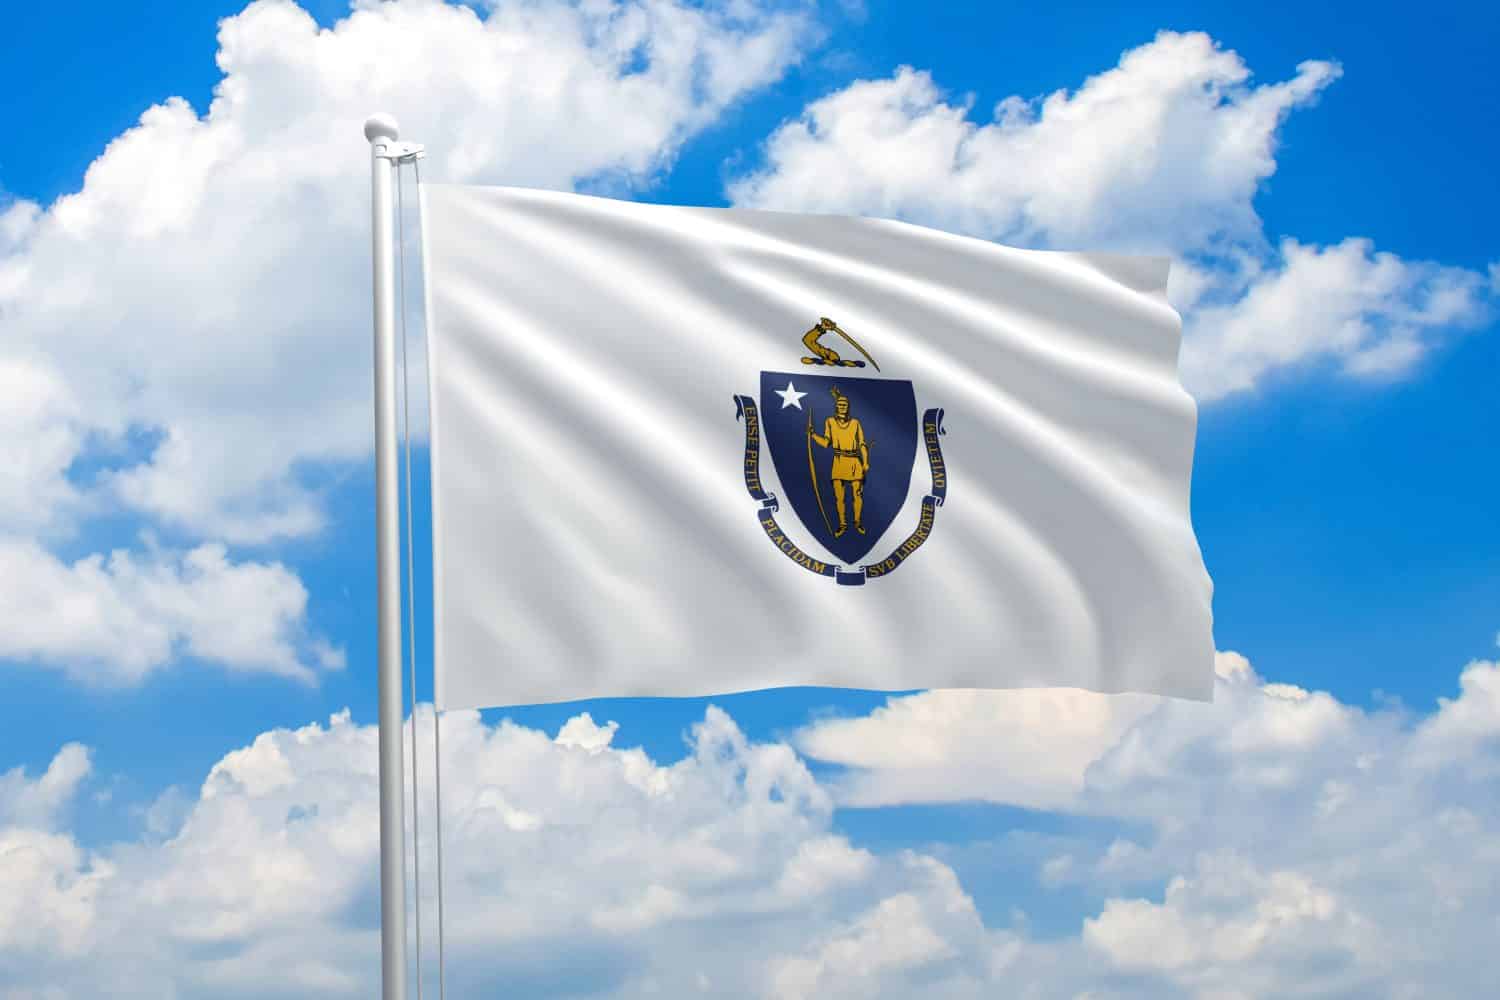 Massachusetts flag waving in the wind on clouds sky. High quality fabric. International relations concept